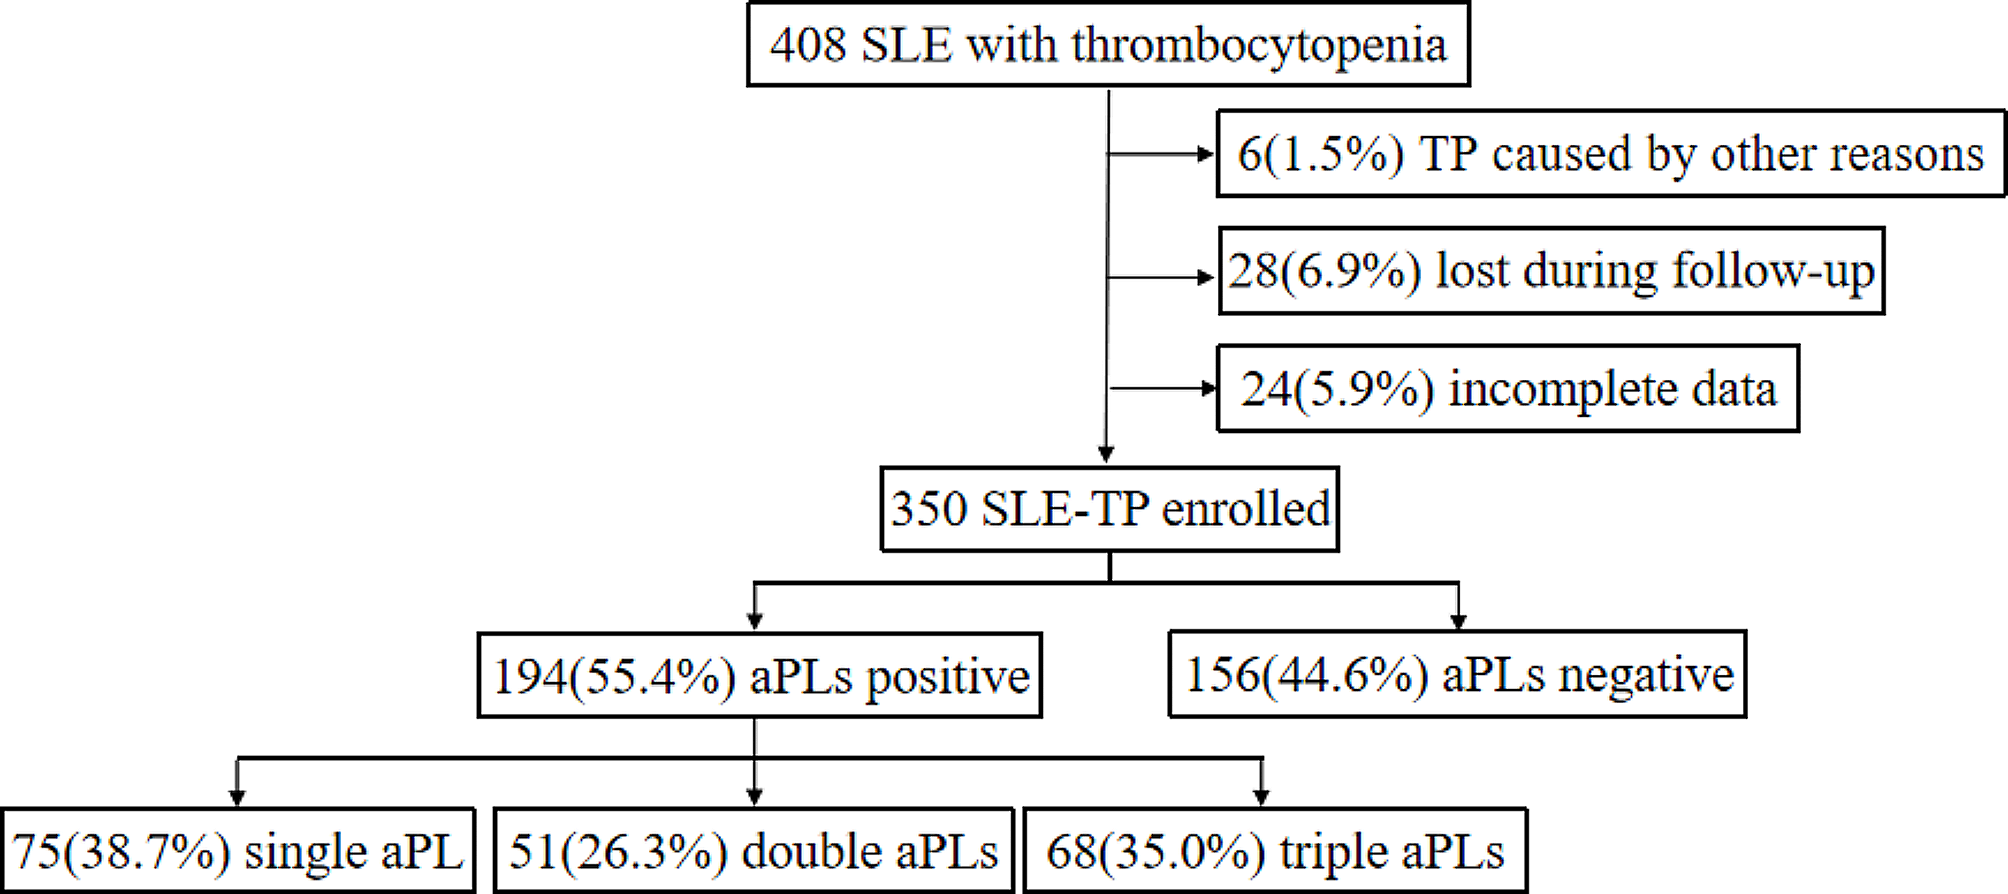 Antiphospholipid antibodies as potential predictors of disease severity and poor prognosis in systemic lupus erythematosus-associated thrombocytopenia: results from a real-world CSTAR cohort study